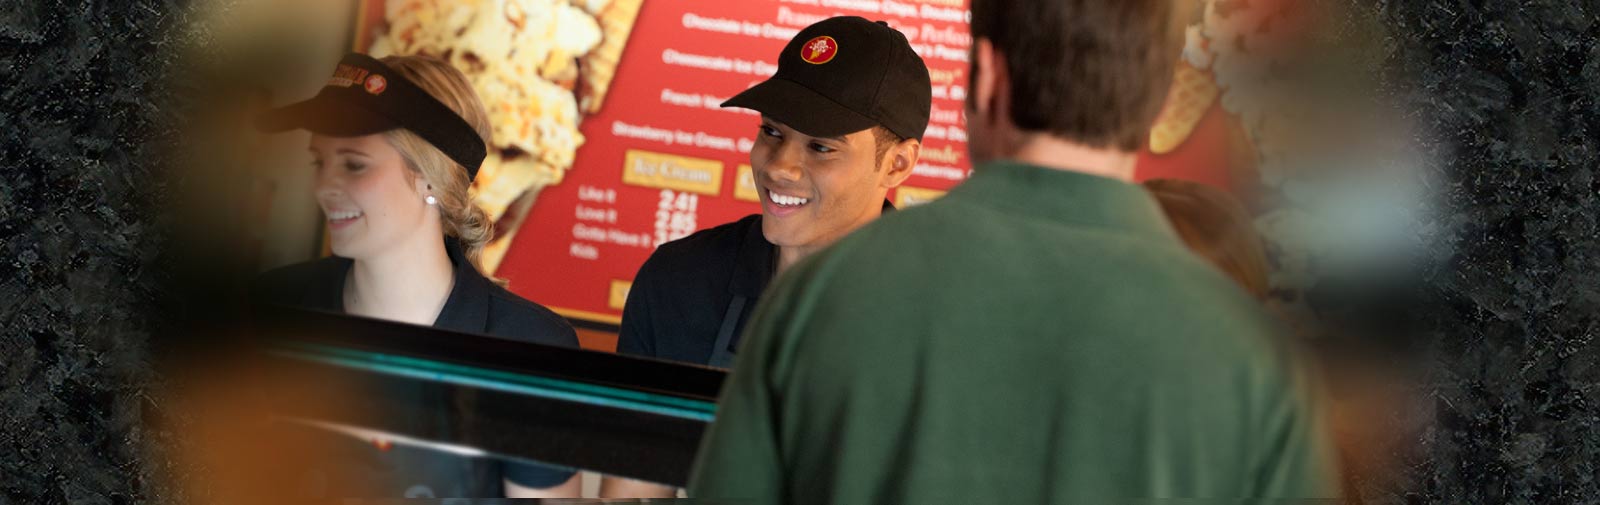 photo of employees smiling